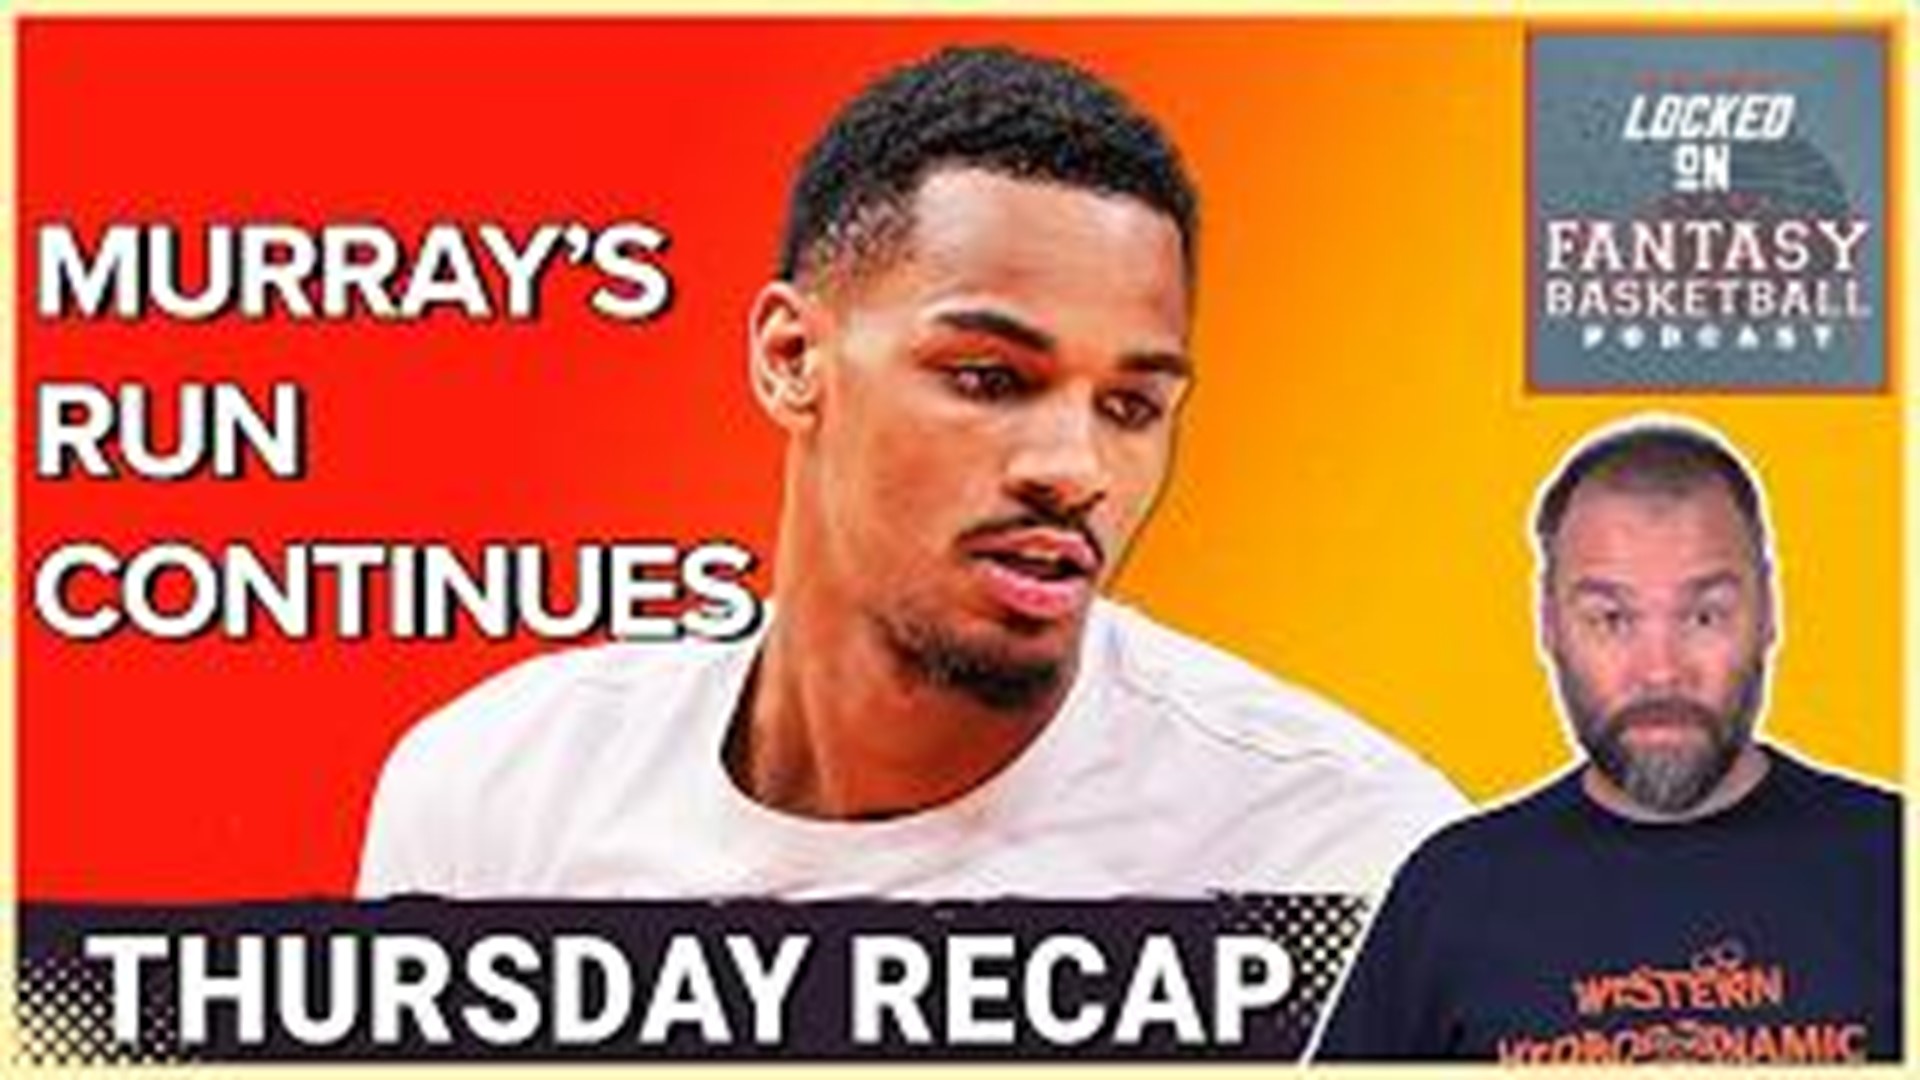 Josh Lloyd is back with a breakdown of Thursday's NBA action, highlighting another incredible performance by Dejounte Murray.